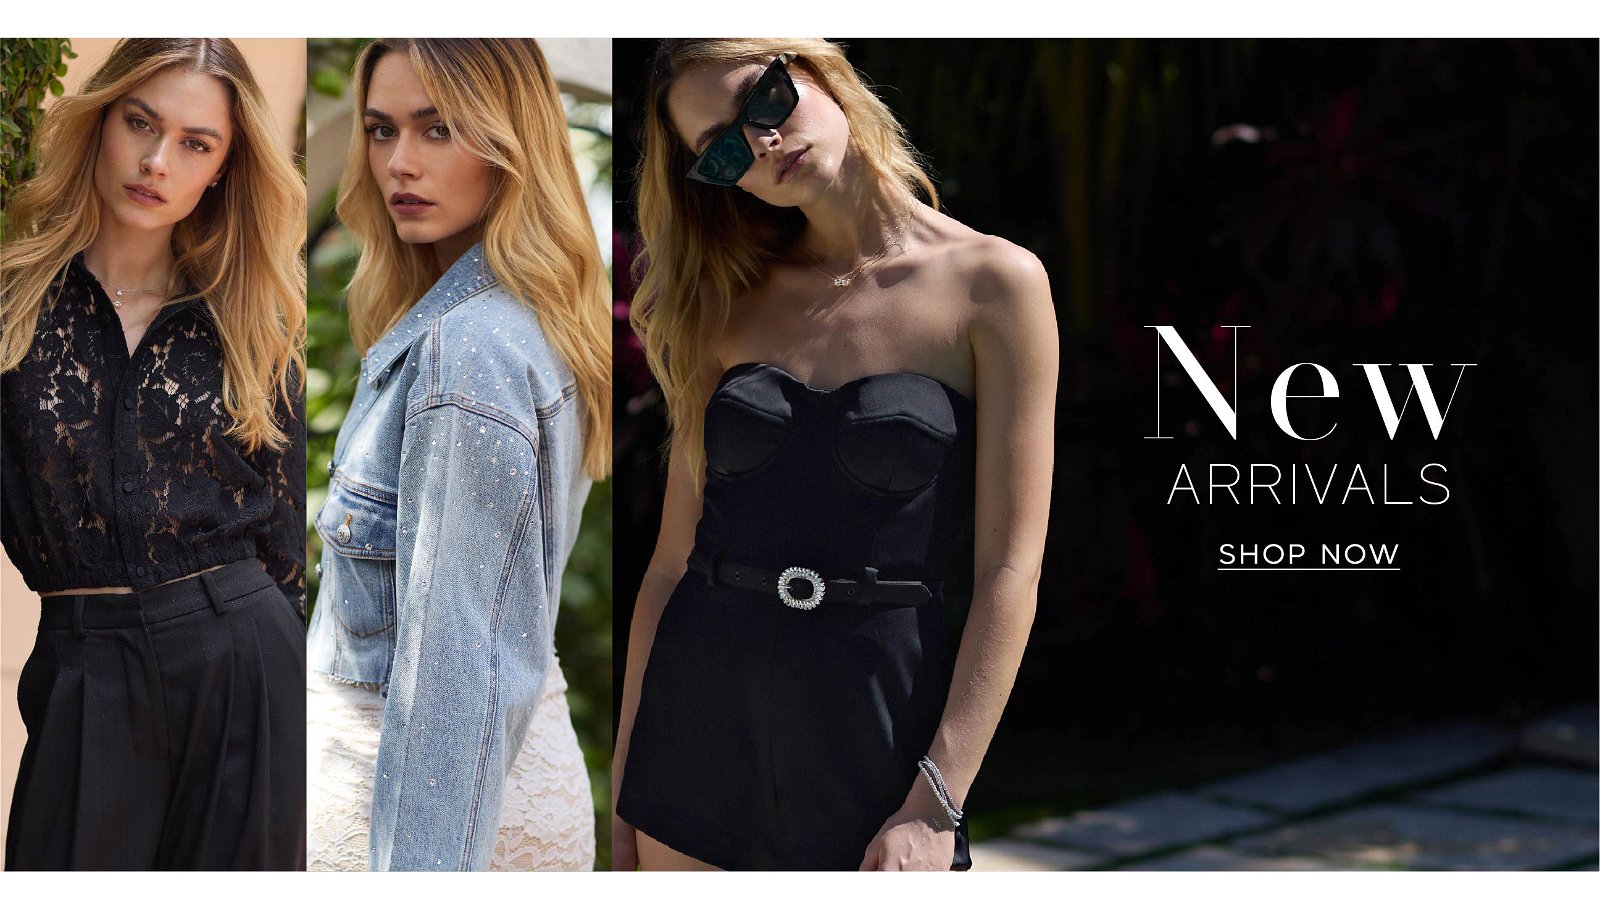 New Arrivals Collection >> Shop Now